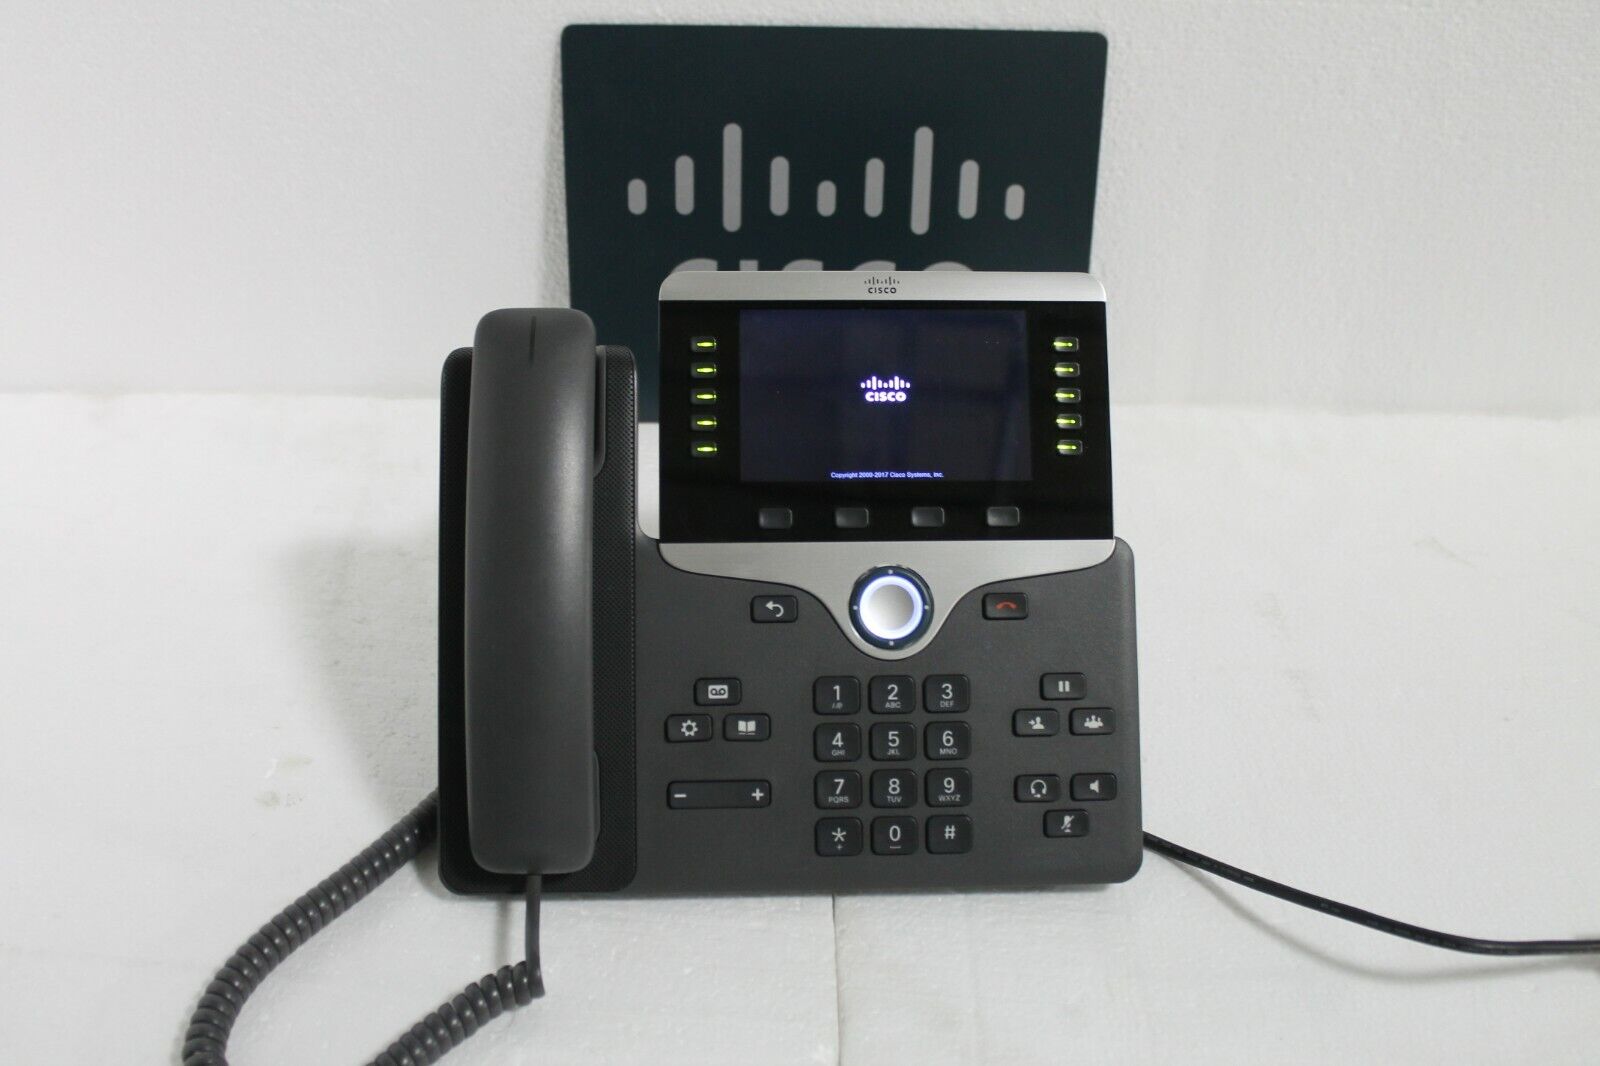 Cisco 8800 Ser. CP-8851-K9 Unified IP Endpoint VoIP Video Phone w/Stand